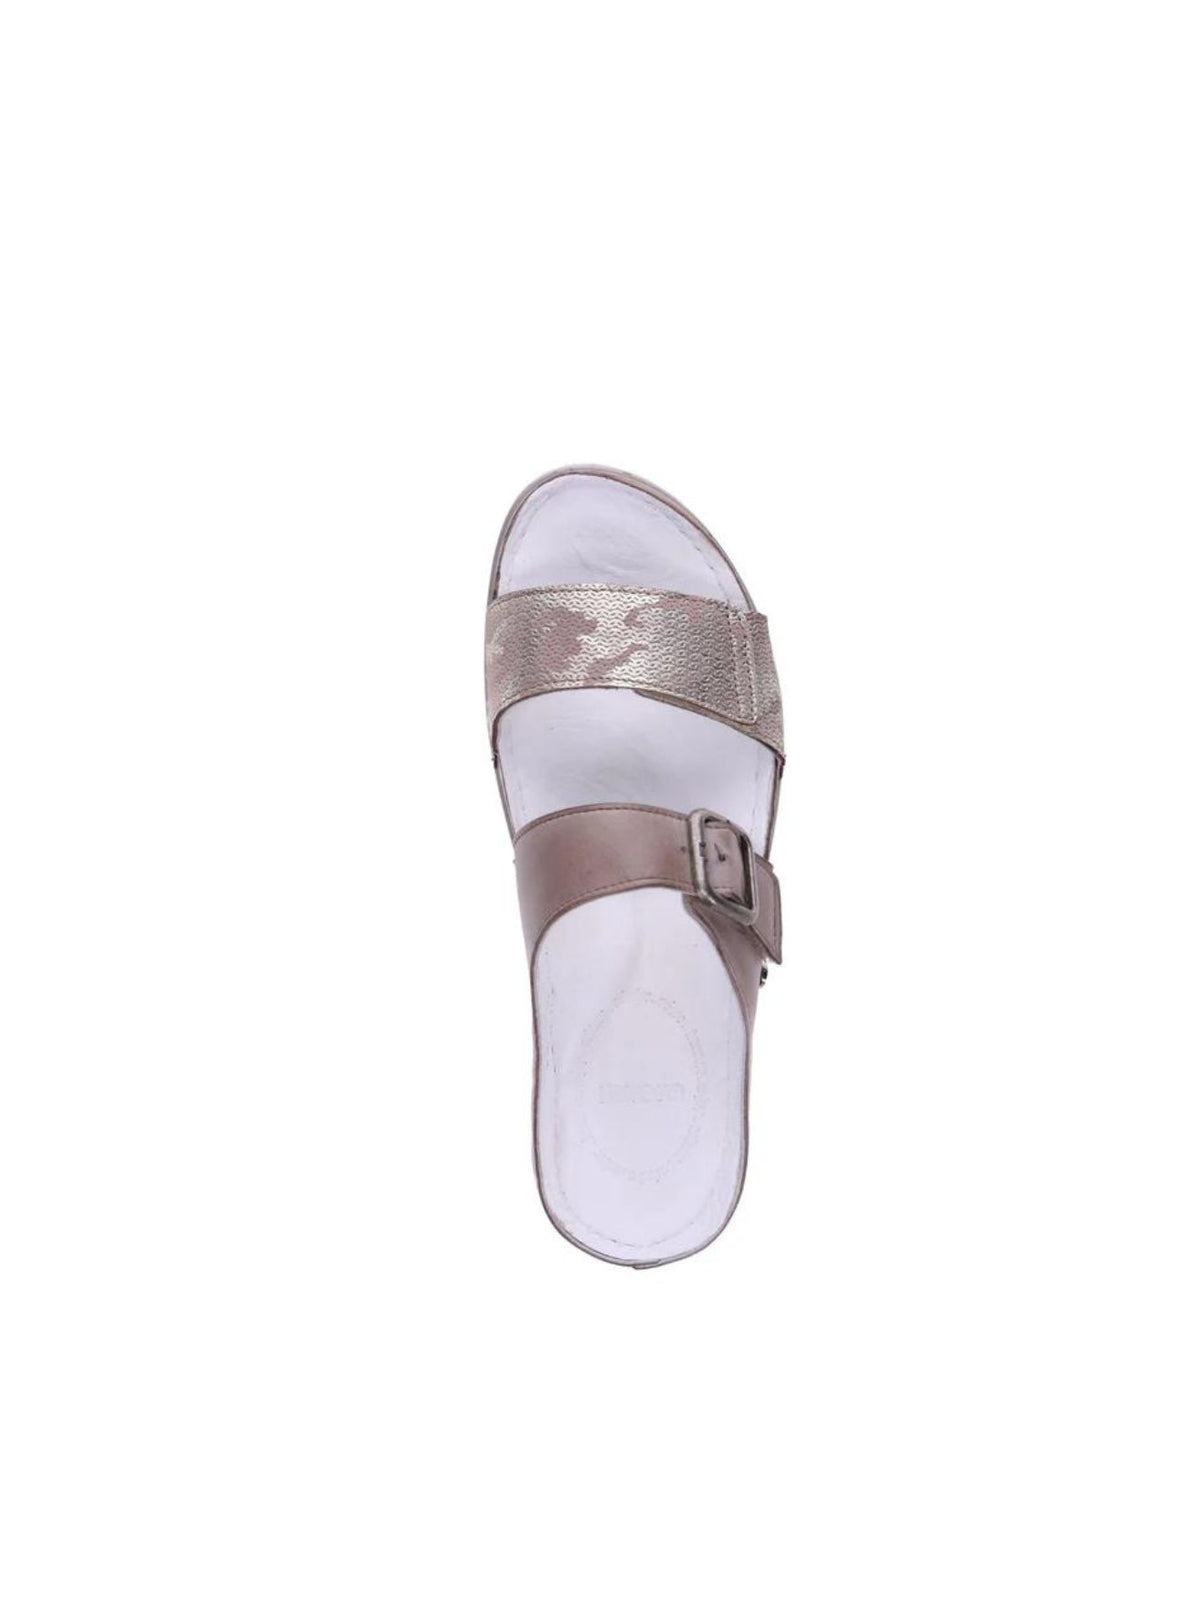 revere palma  2 strap slide sandals in taupe-top view